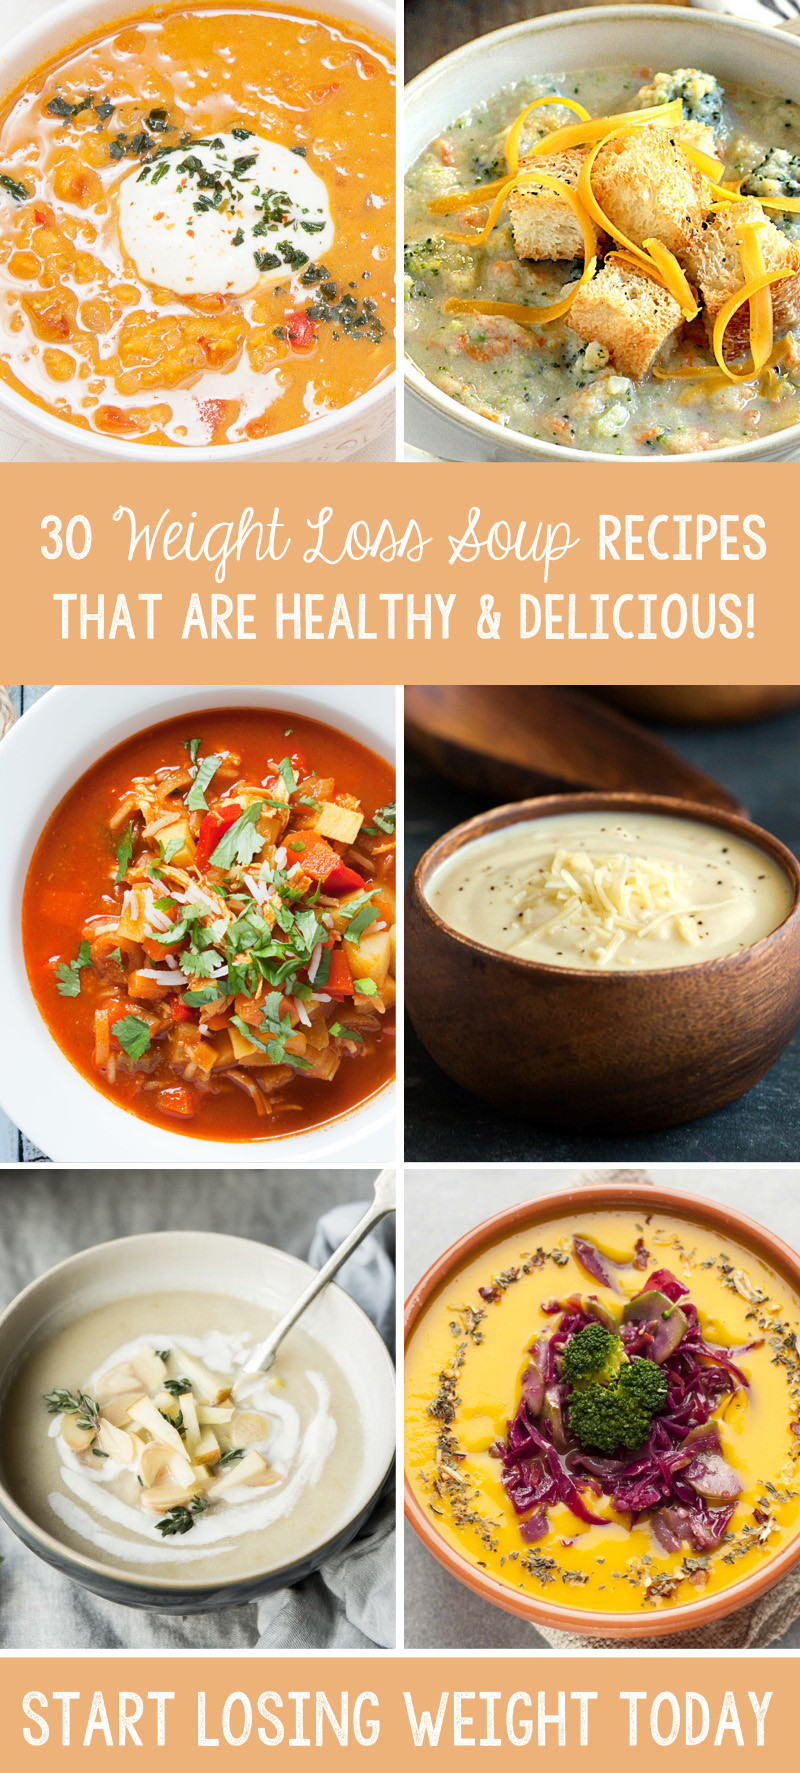 30 10 Weight Loss Recipes
 30 Weight Loss Soup Recipes That Are Healthy & Delicious